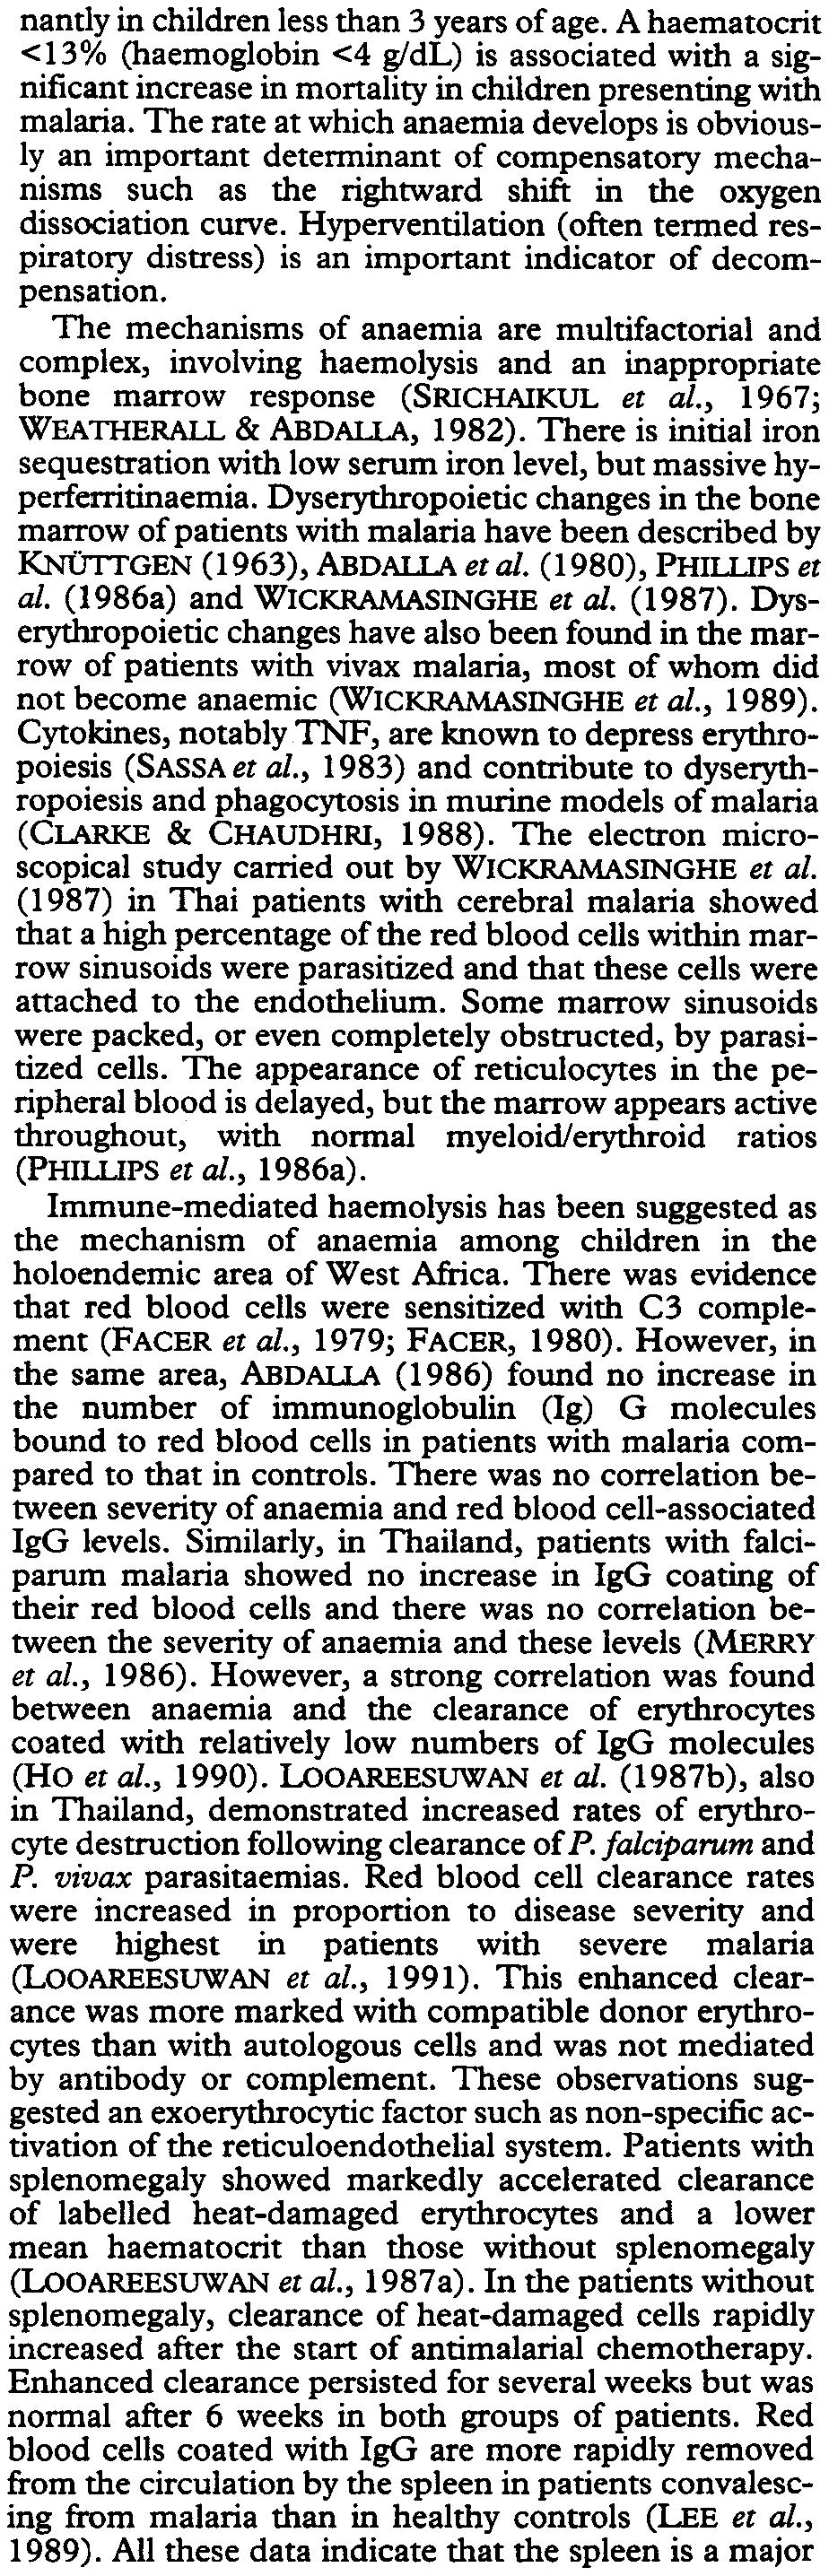 Sl/2 SEVERE FALCIPARUM MAlARIA dal haemorrhages were common but not associated with the degree of raised intracranial pressure.